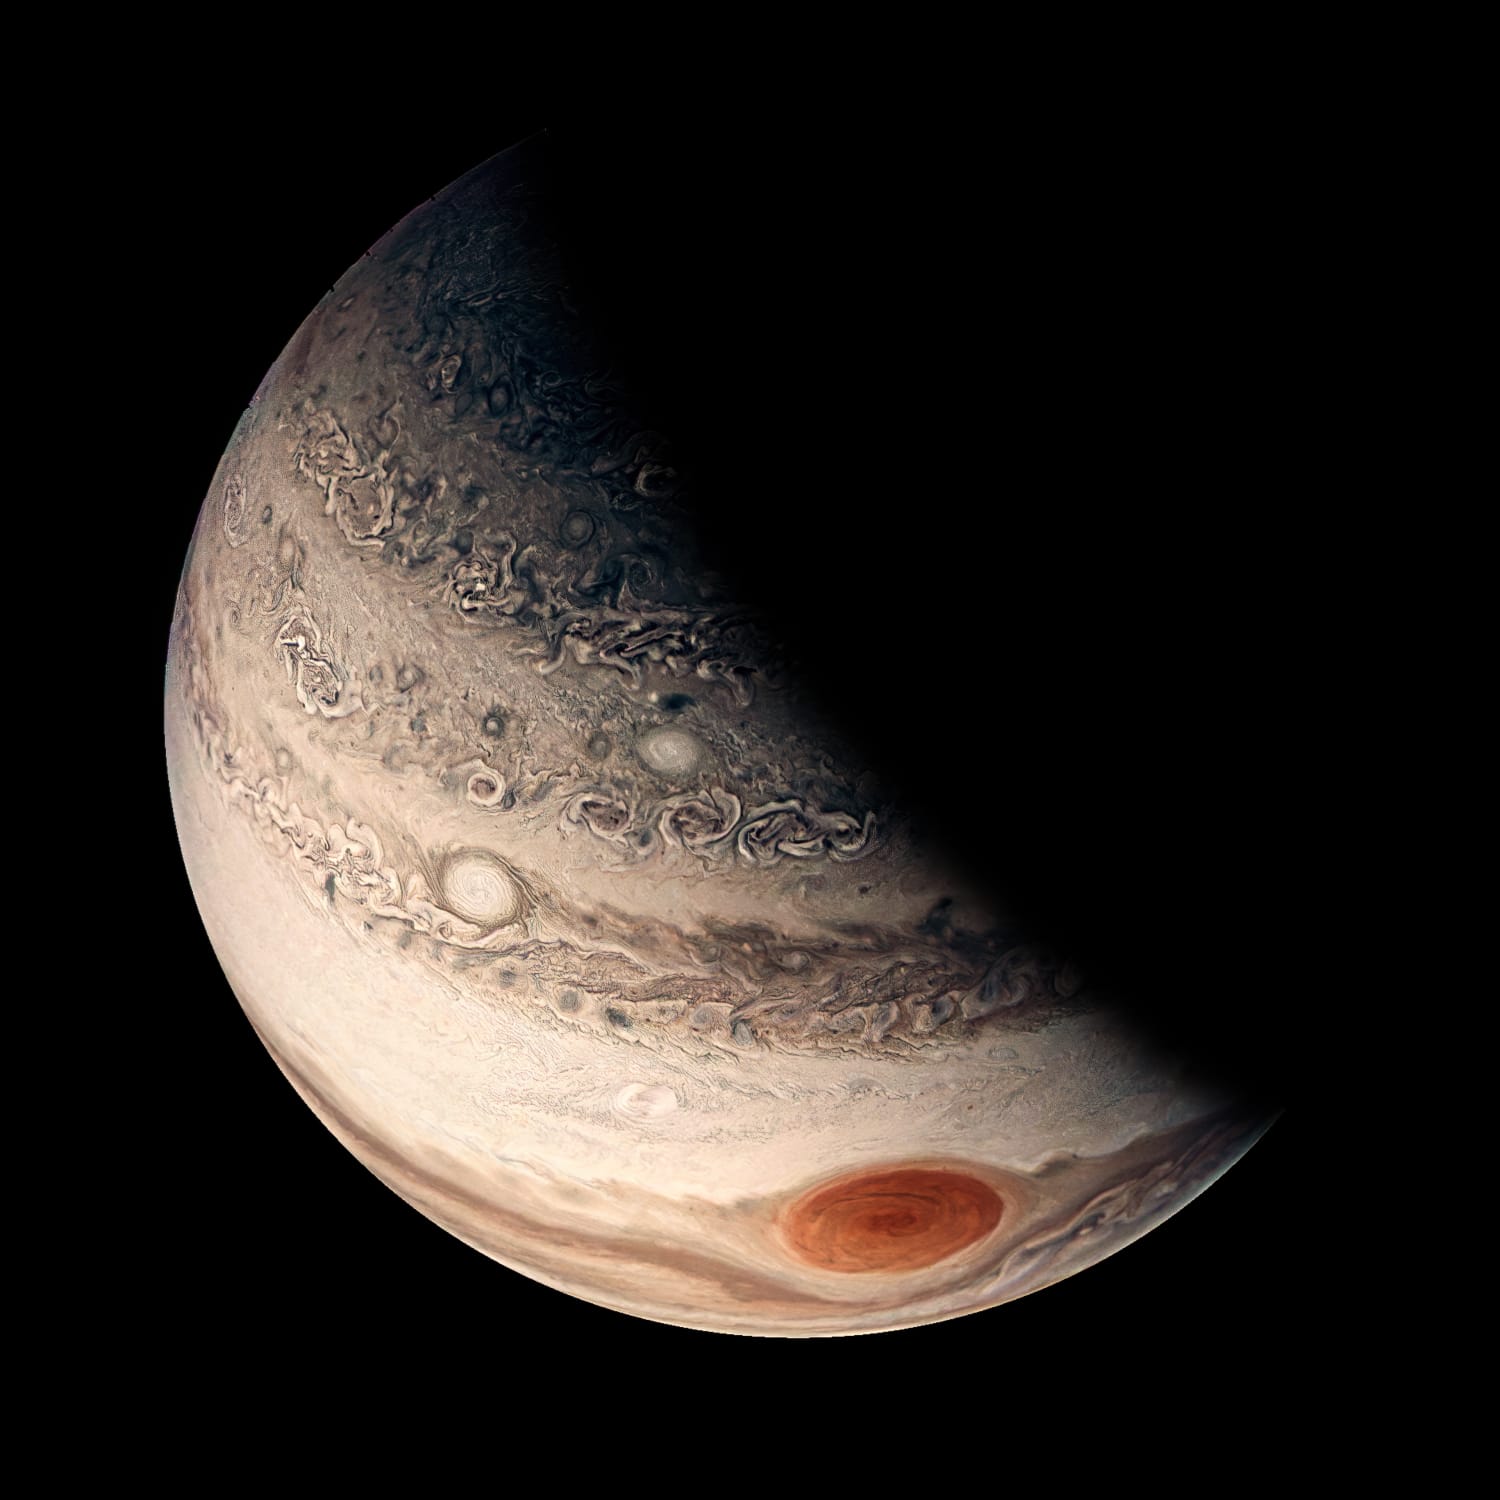 Jupiter, taken by the JUNO spacecraft and image post processing done by me